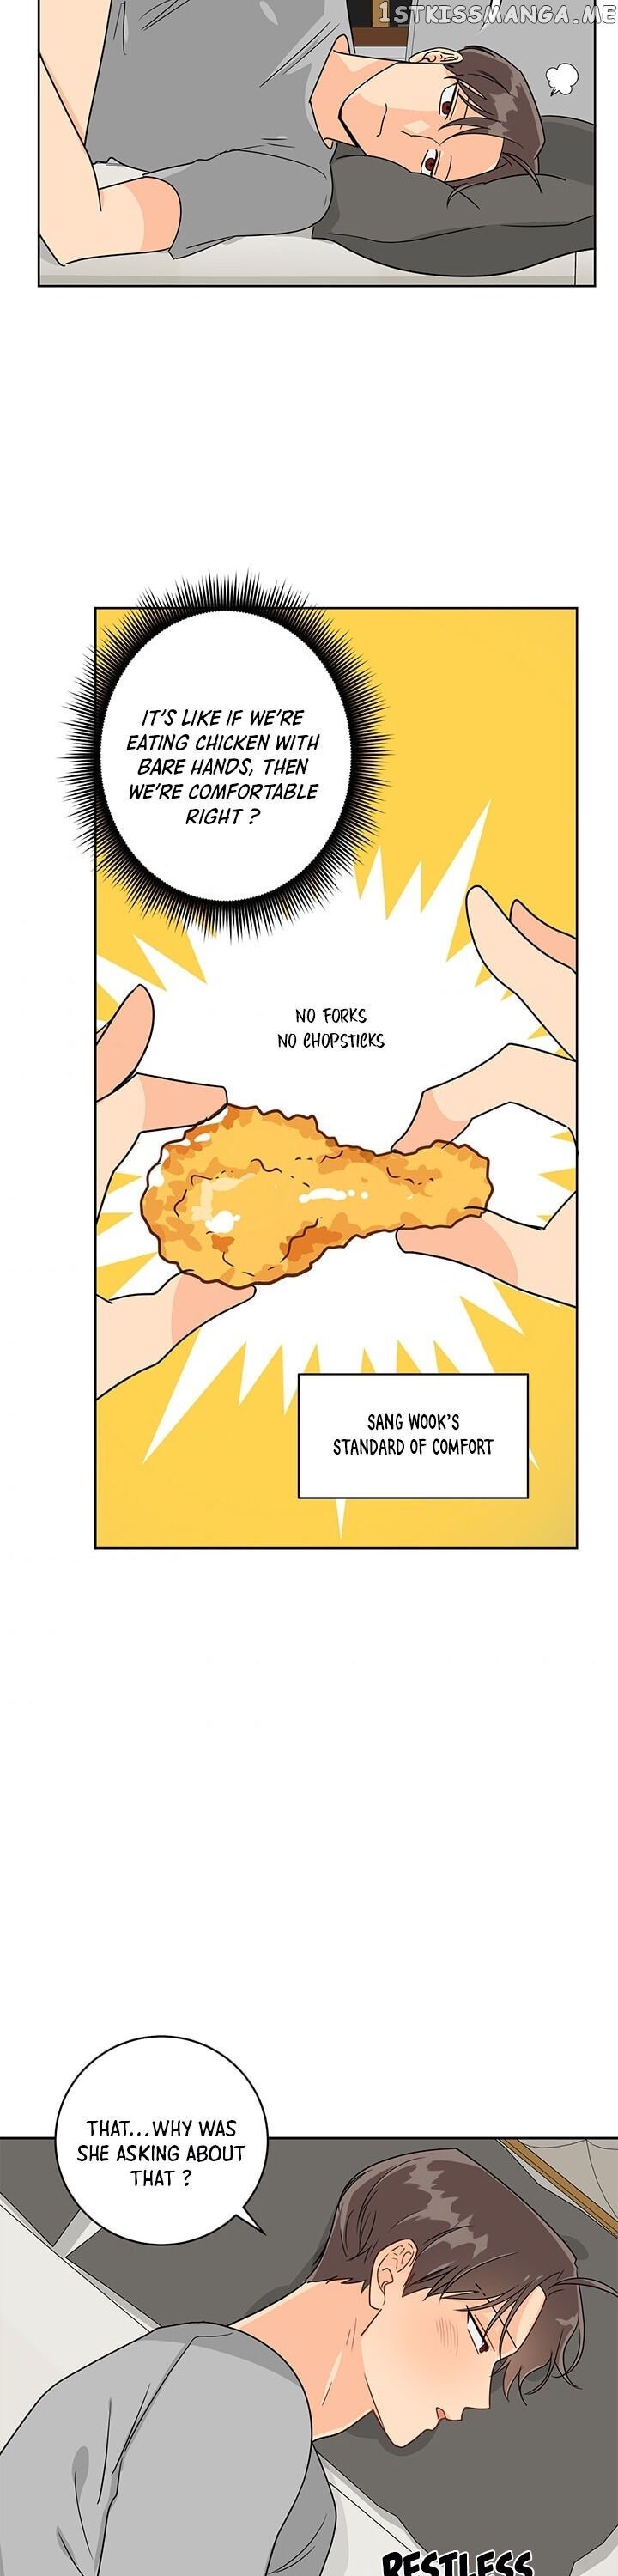 The Greatest Chicken chapter 16 - Page 4